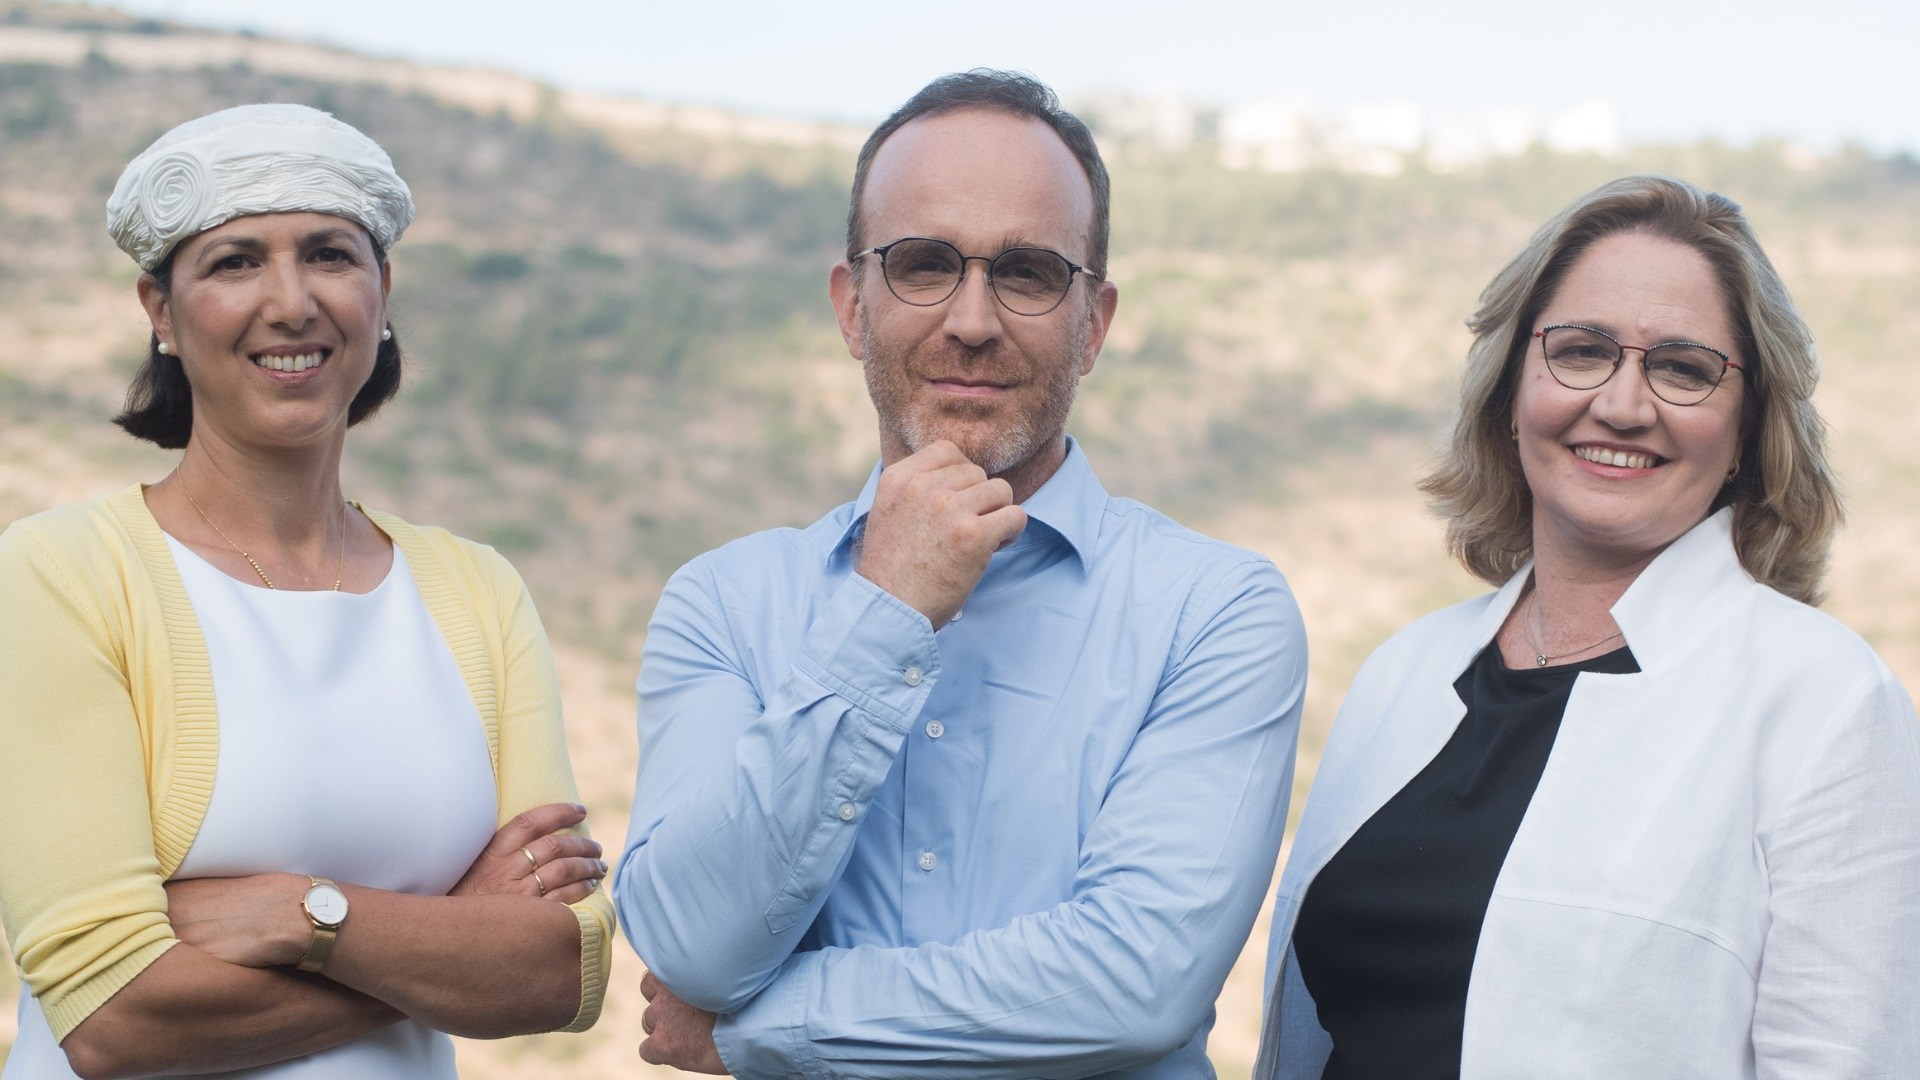 Aleph Farms’ leadership team from left to right: Shulamit Levenberg, Didier Toubia, Neta Lavon.